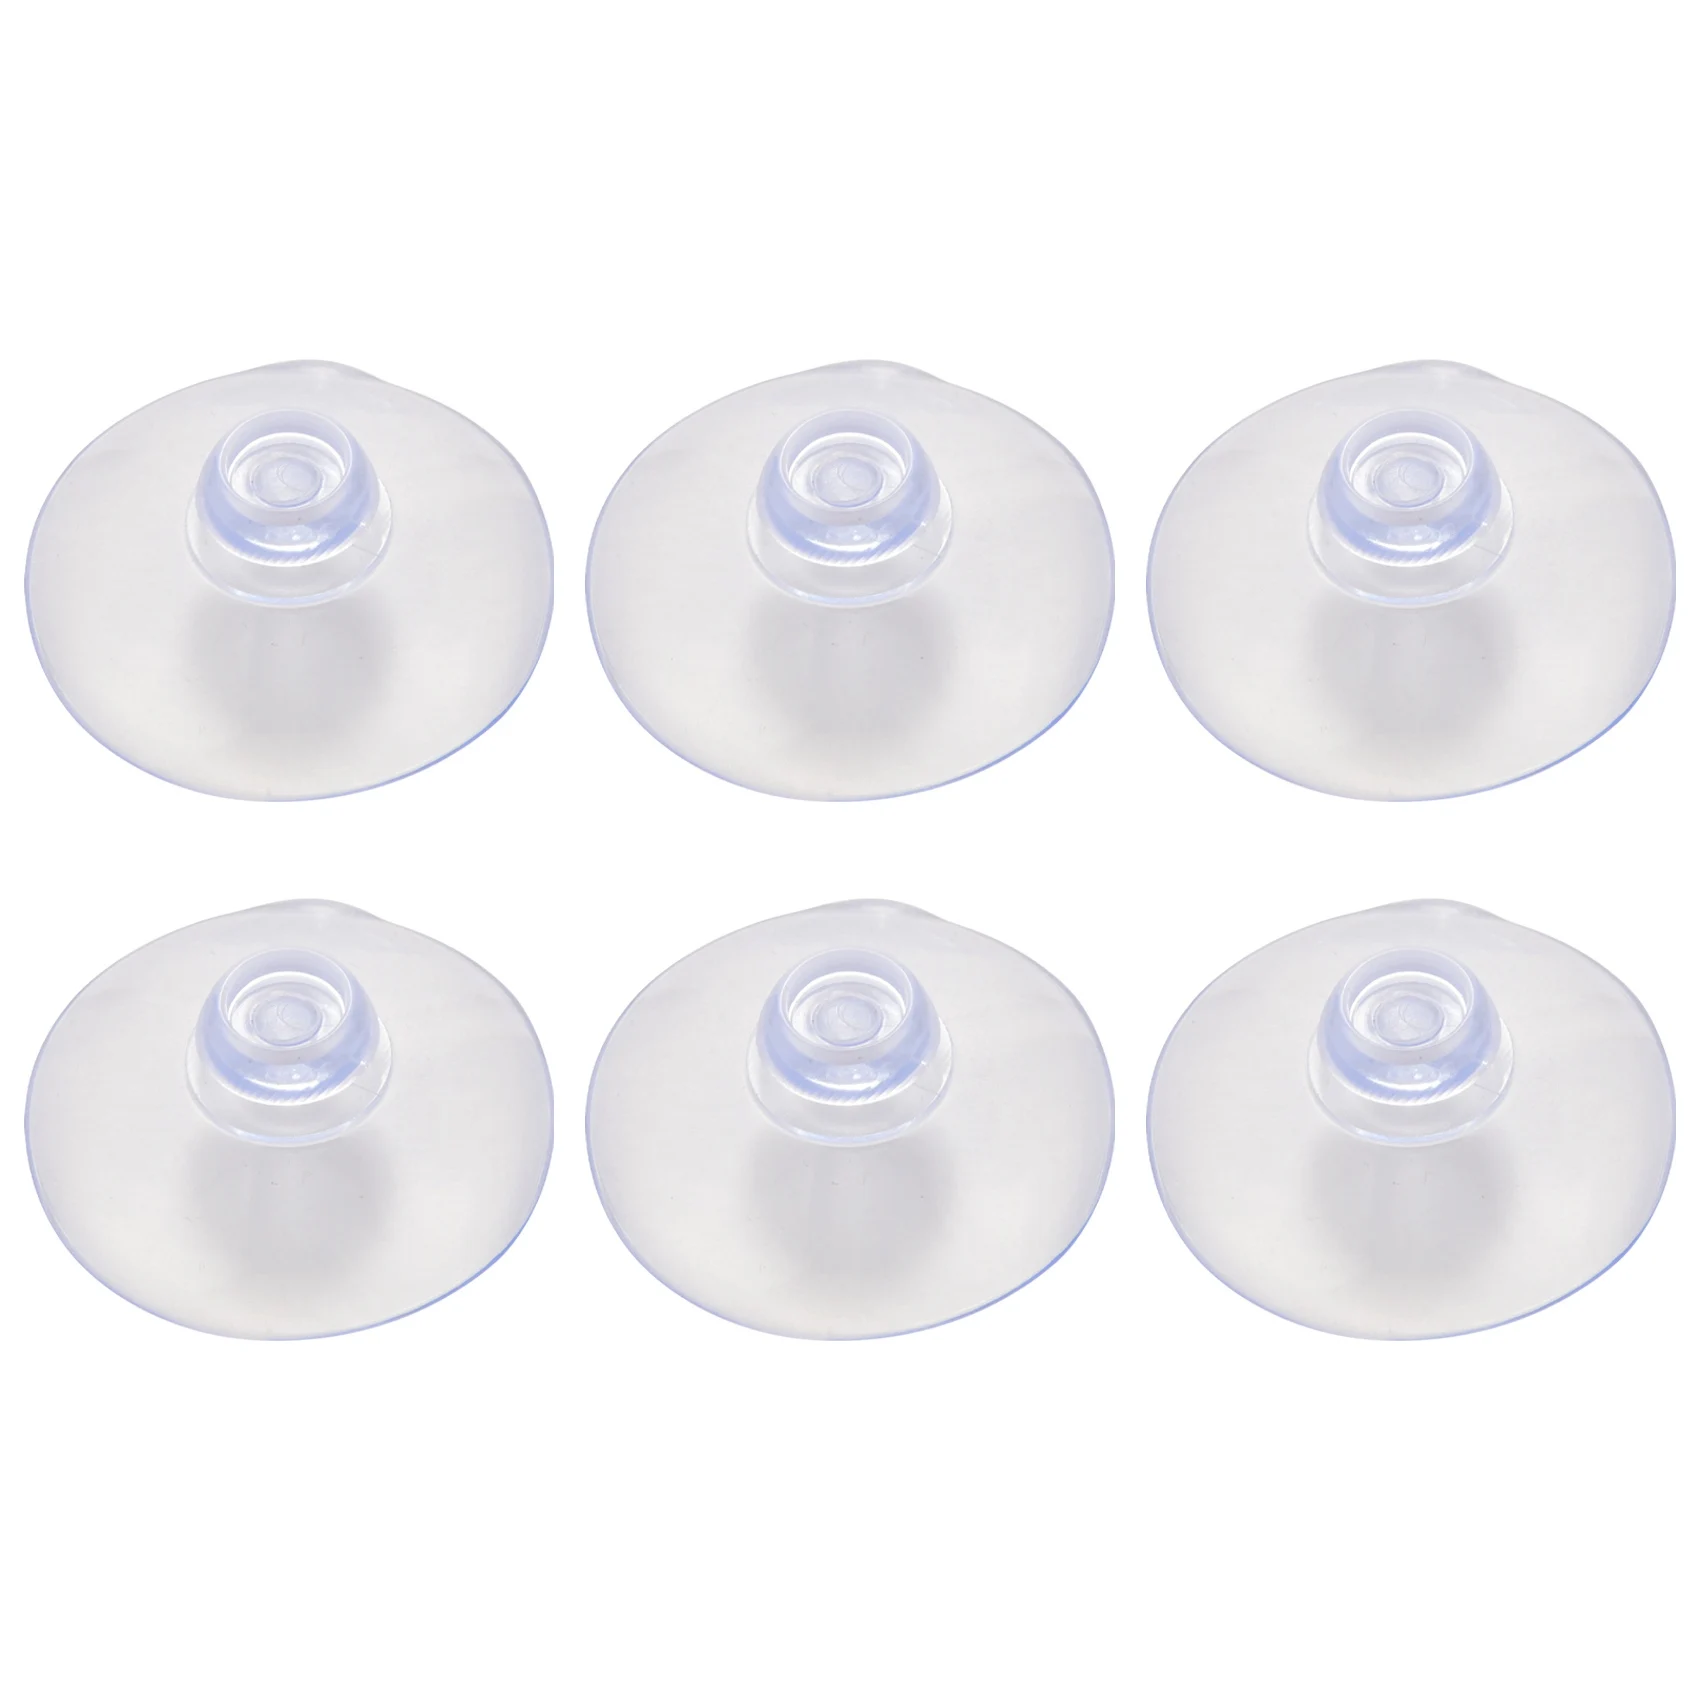 

100Pcs 40Mm Clear Suction Cup Sucker Mushroom Head Suction Cup Suction